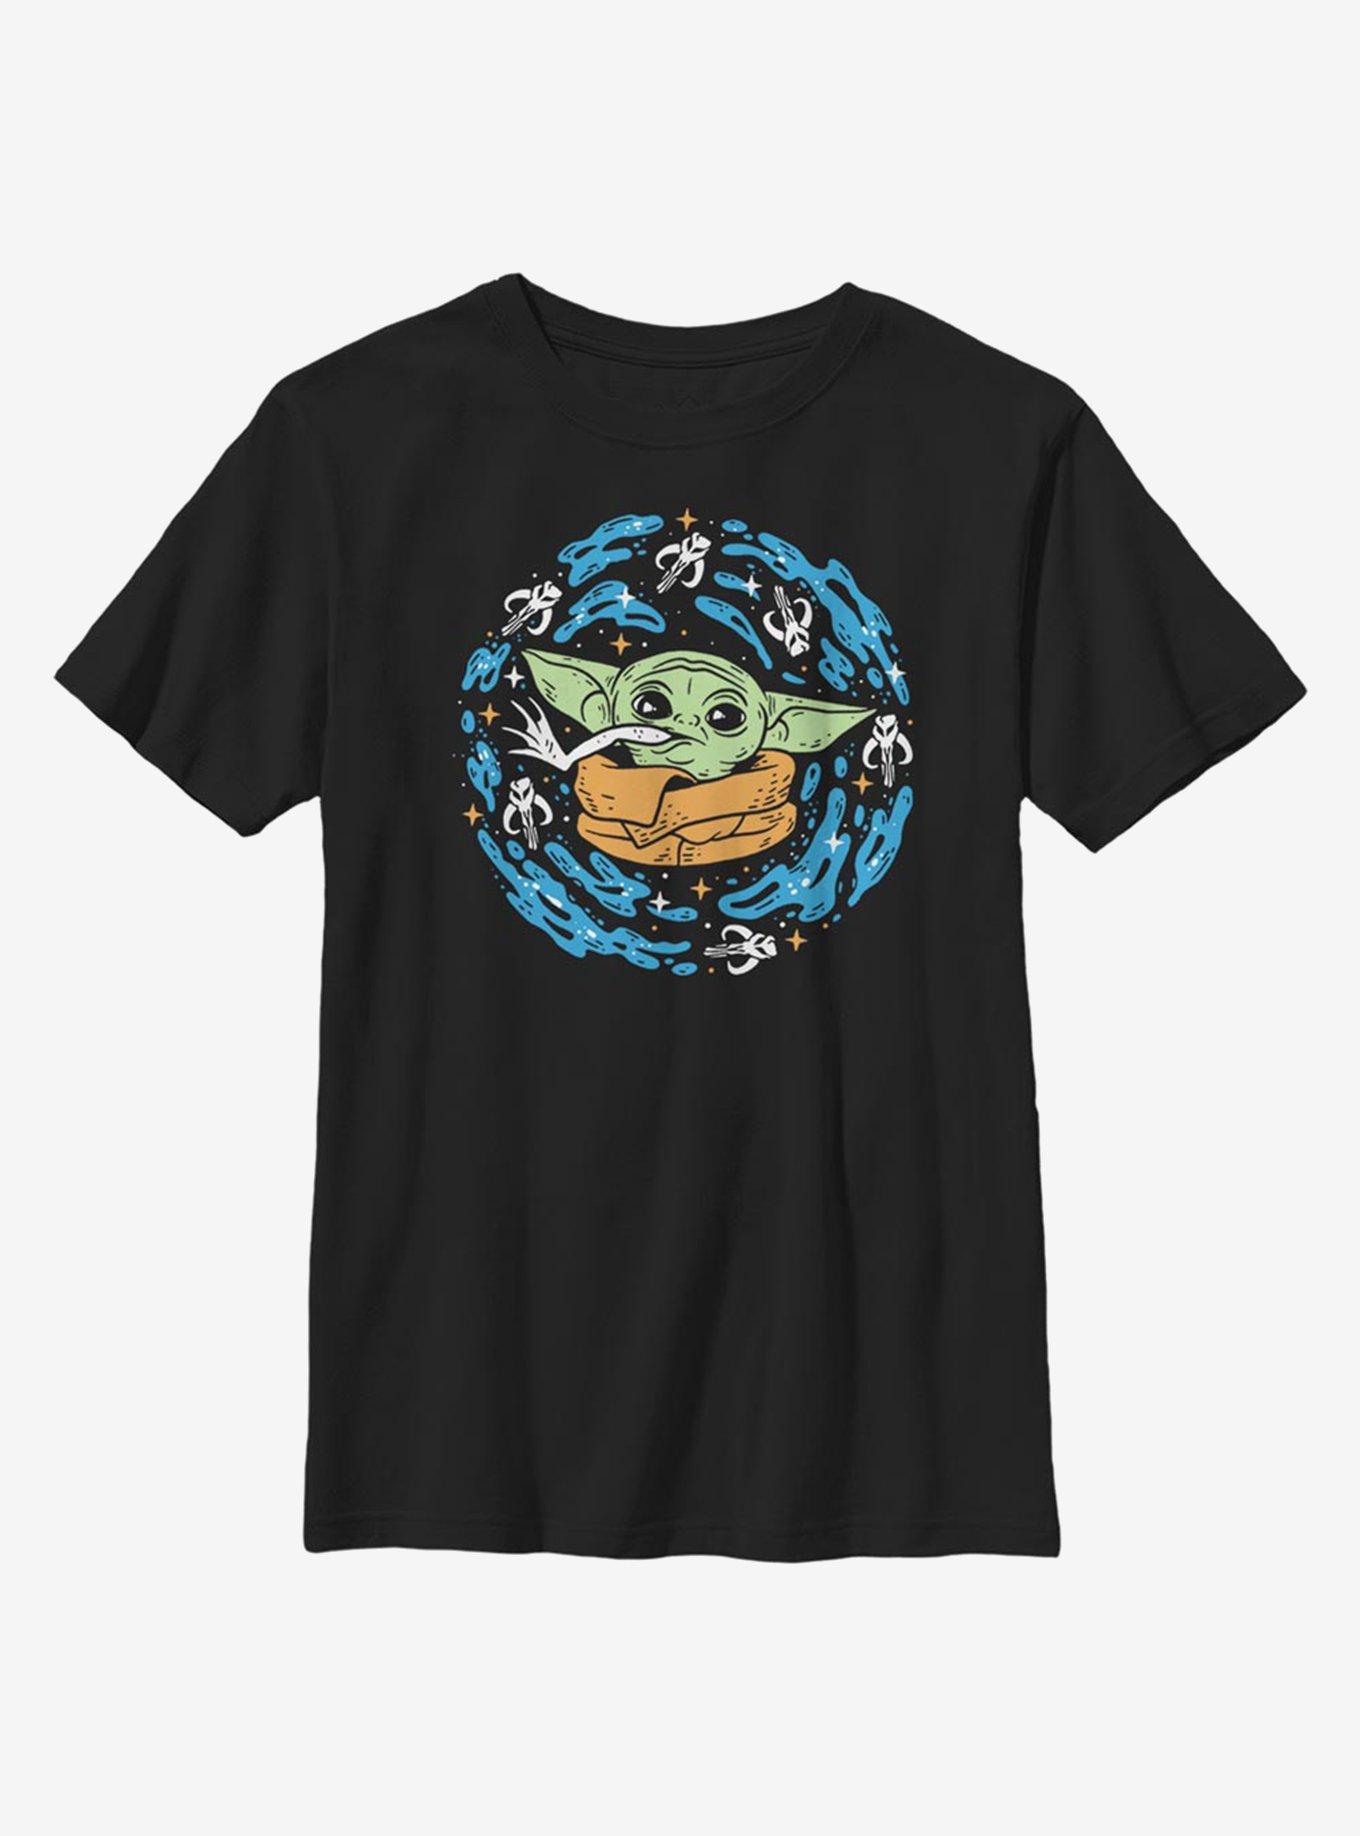 Star Wars The Mandalorian The Child Frog Spiral Youth T-Shirt, BLACK, hi-res